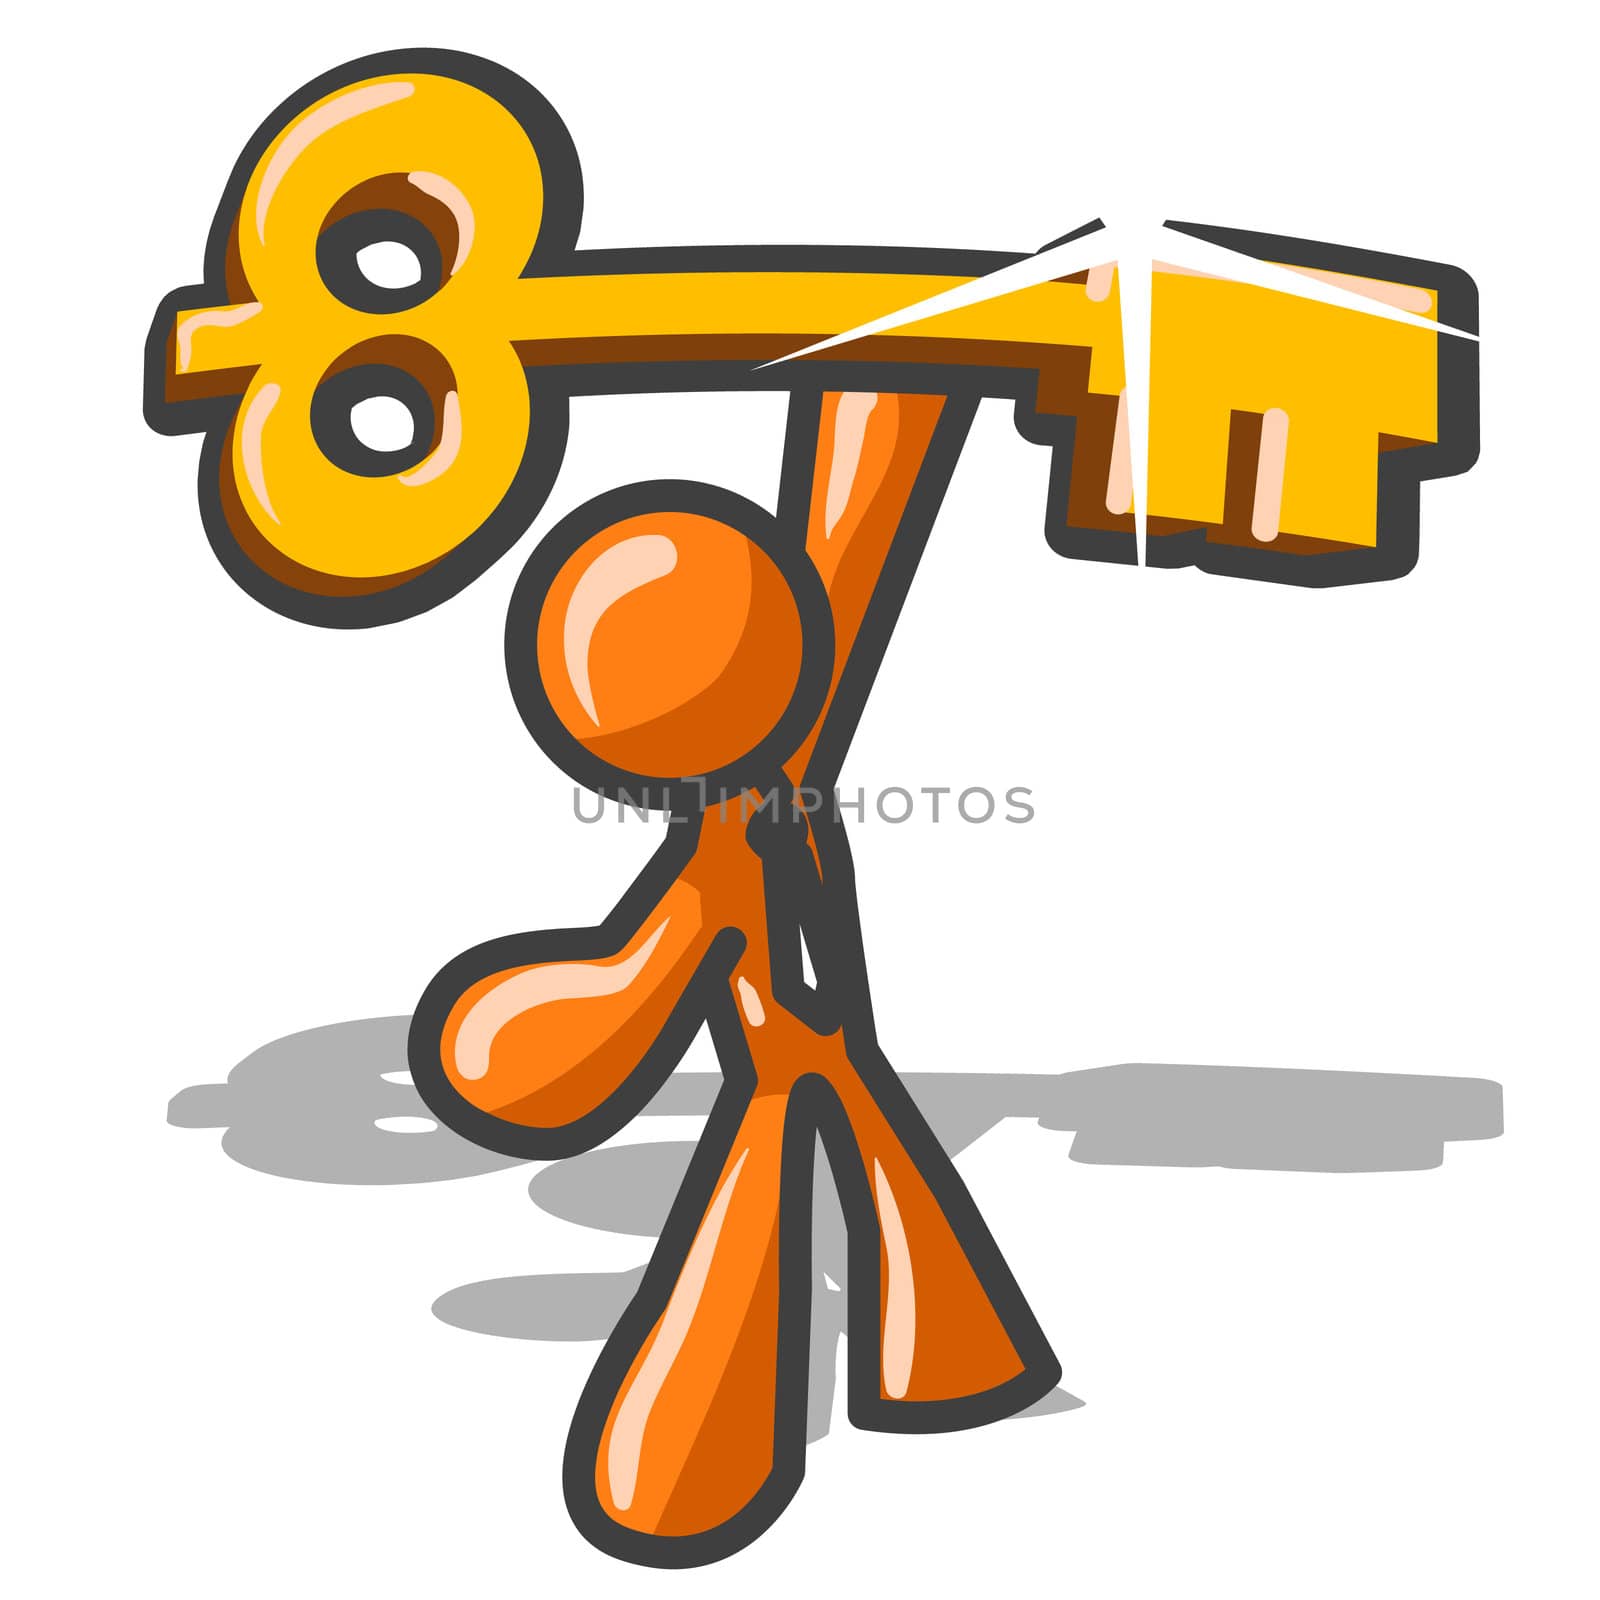 An orange man holding up the key to success in a mighty stance. 